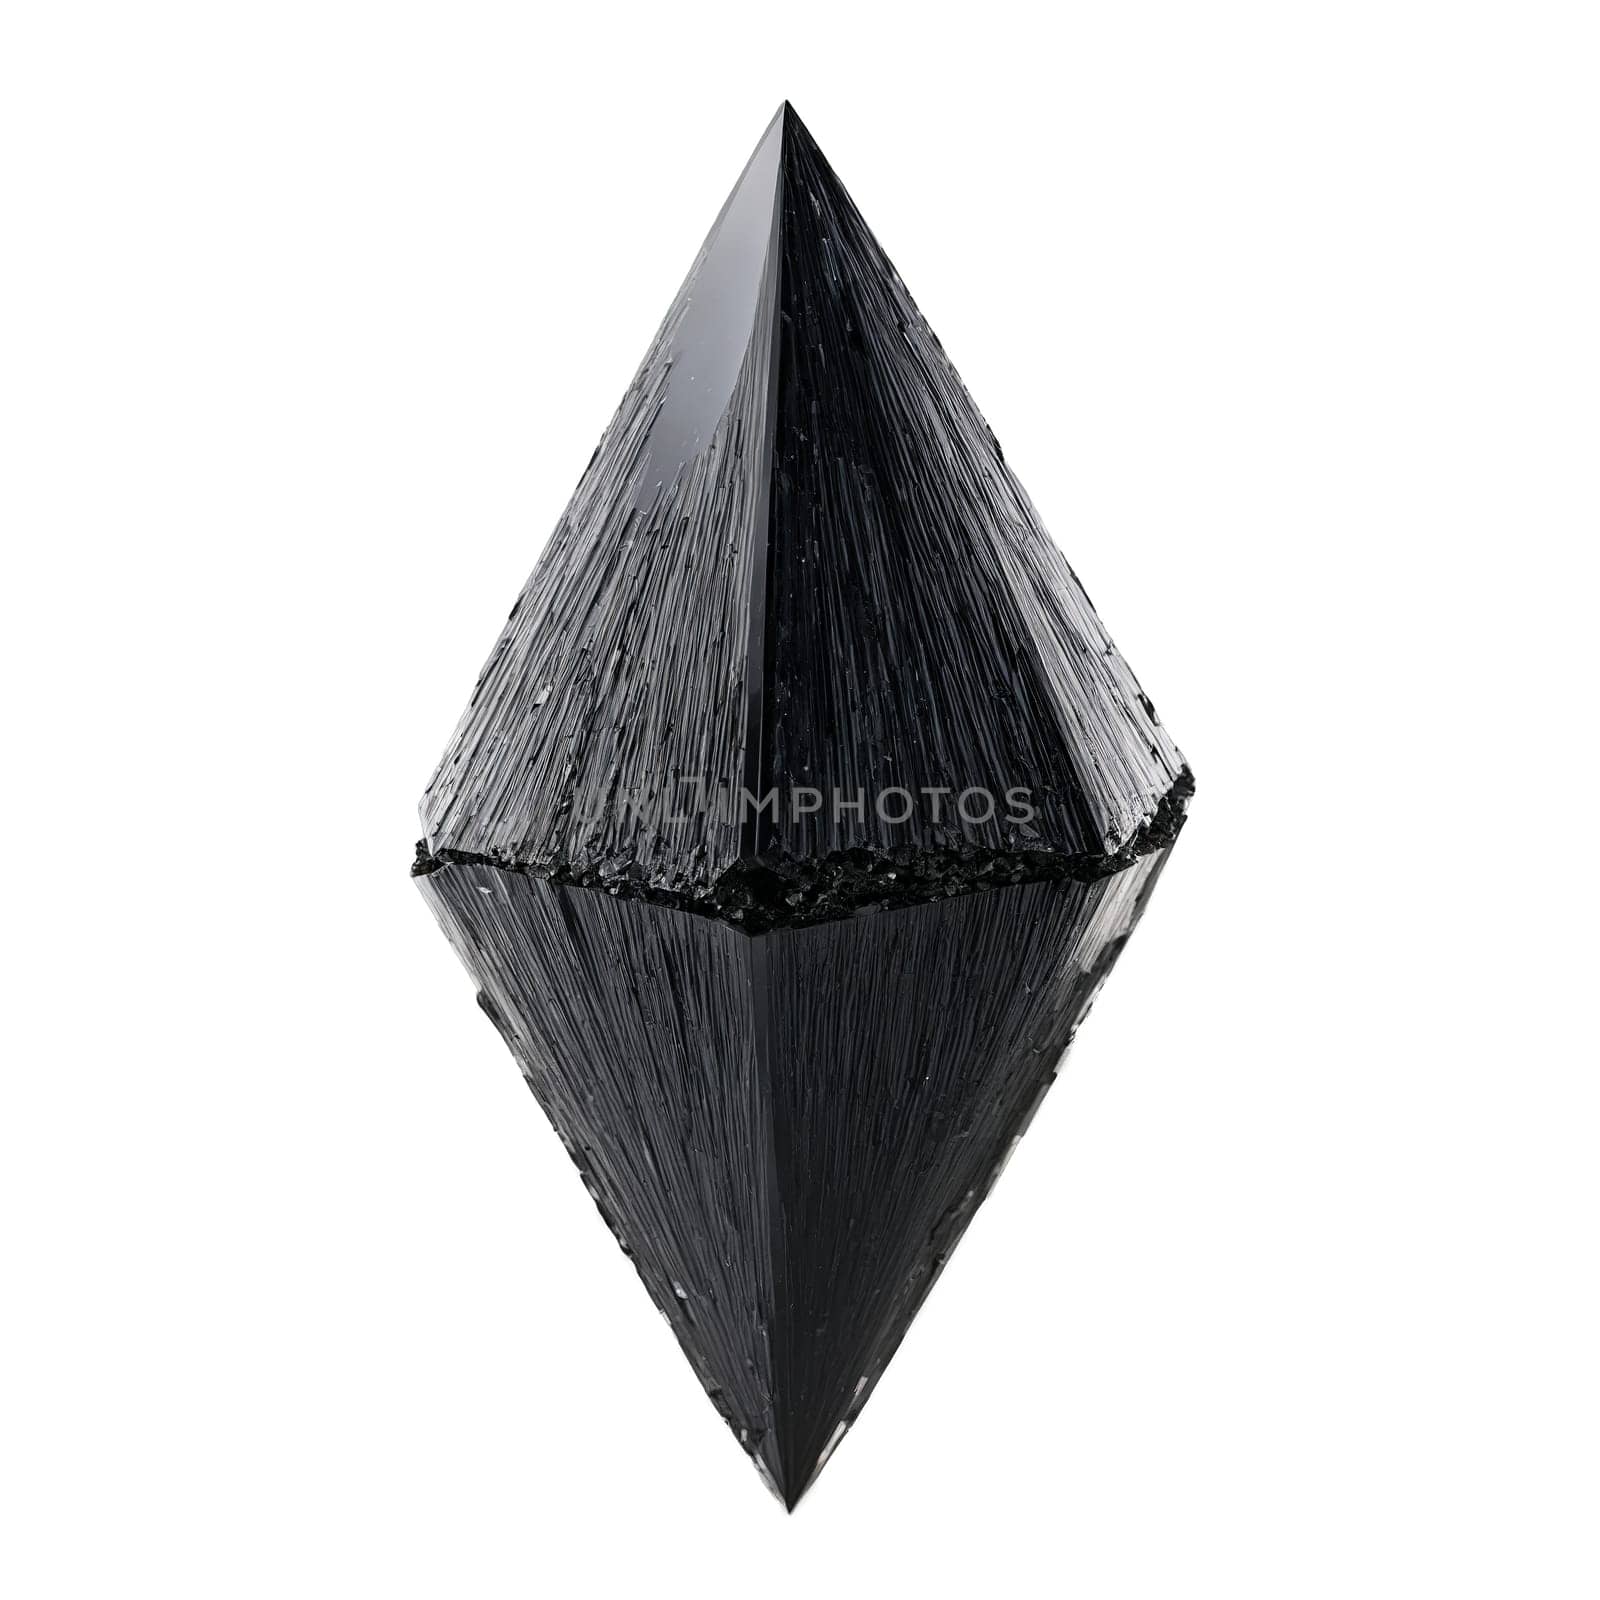 Obsidian A deep black obsidian with a sharp edge and a reflective surface floating against by panophotograph